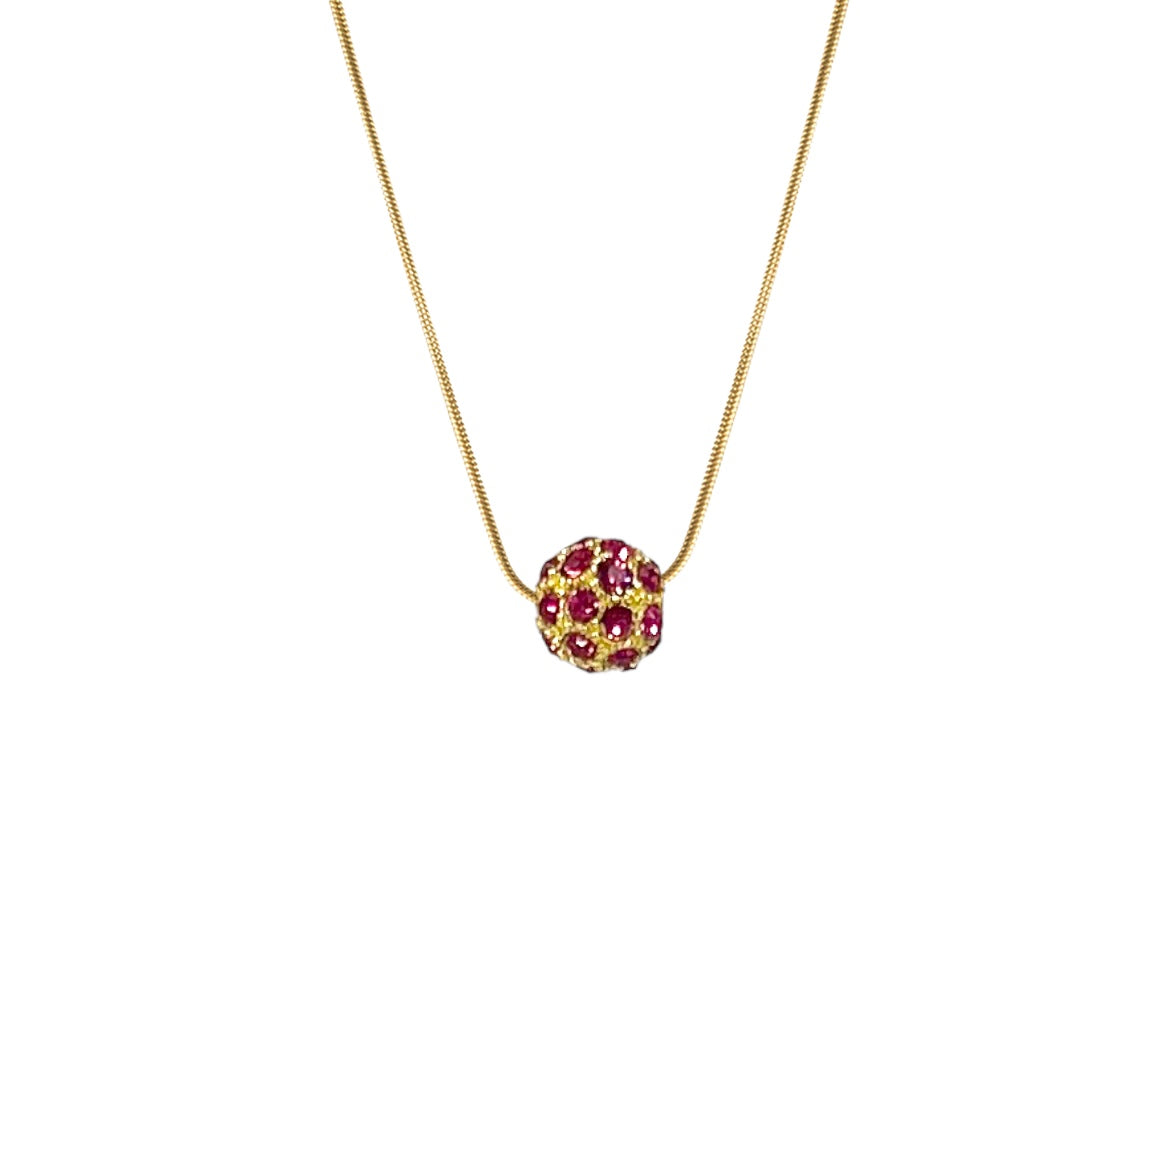 Kenzie Necklace - Magenta with Gold